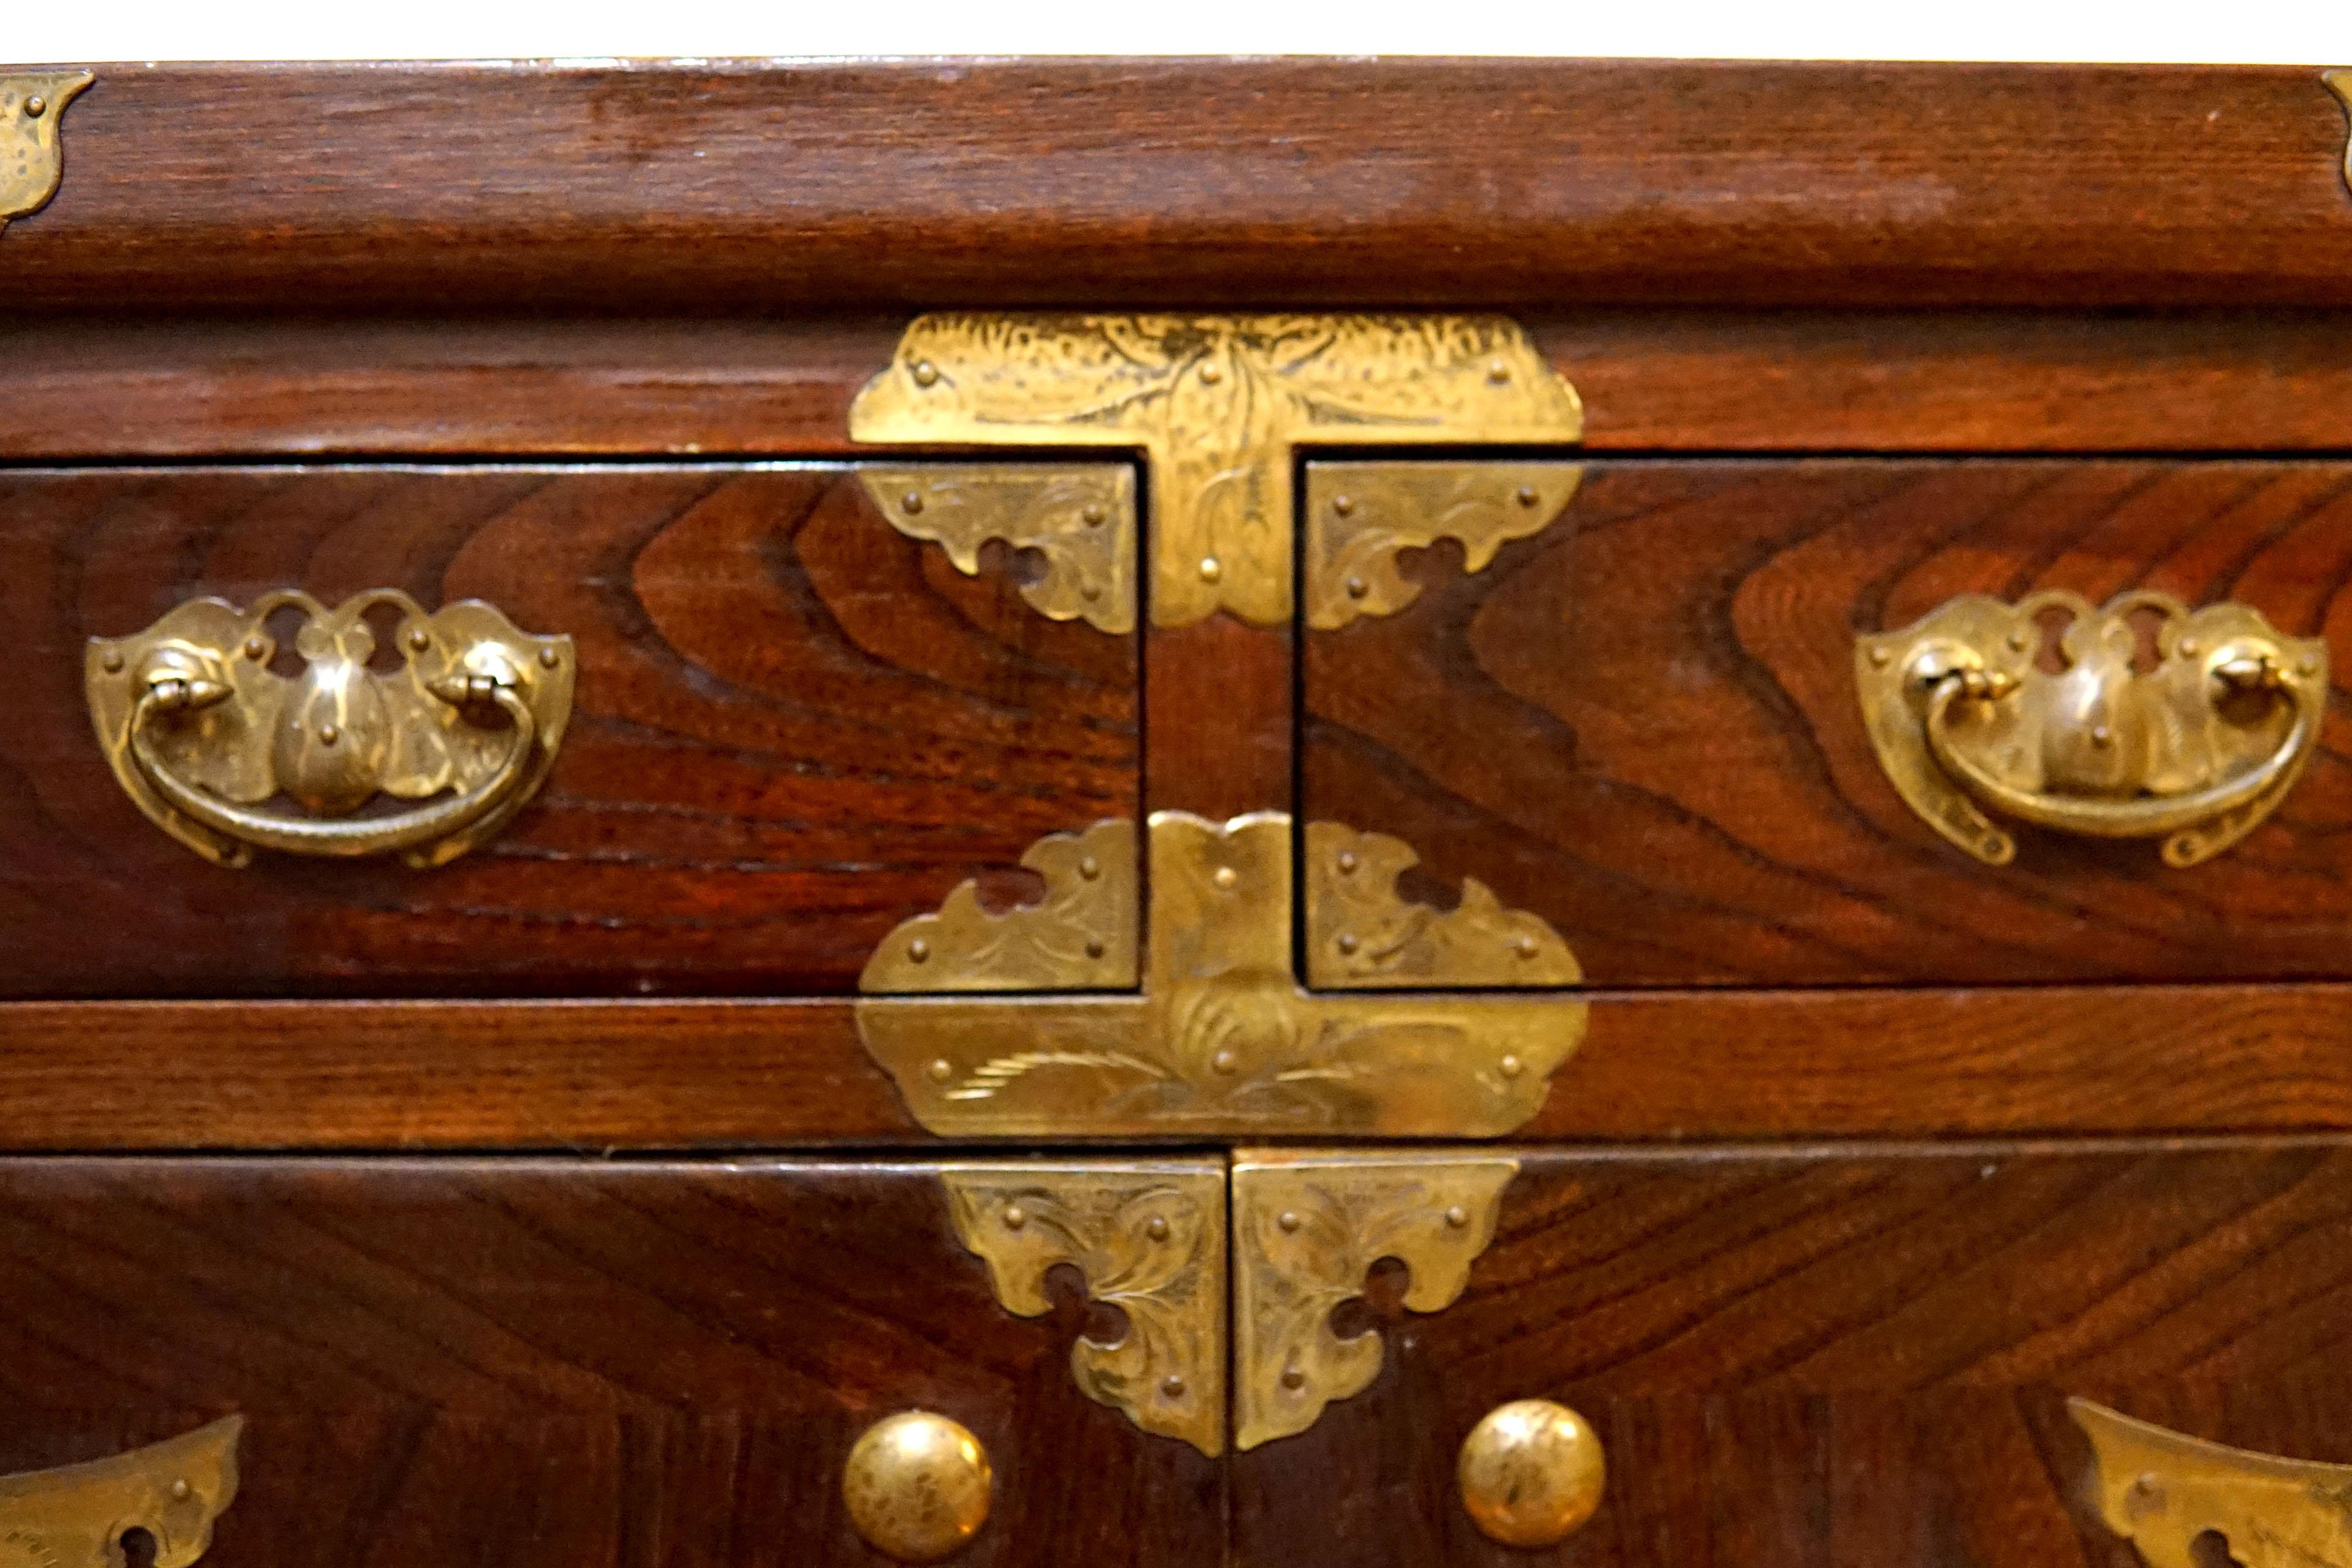 The patina on this elm wood tansu chest is reflective and deep. The brass also has had time to develop a deep patina that contrasts the elmwood. It mixes wonderfully with other periods and styles--a great accent piece. This majestic  tansu chest has